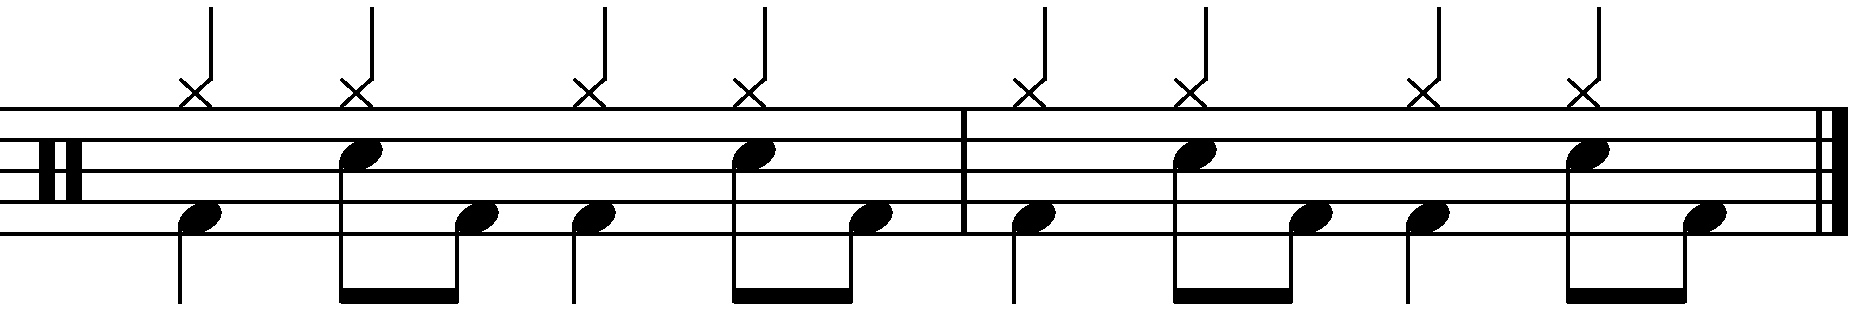 2 Bar Grooves - Example 1f